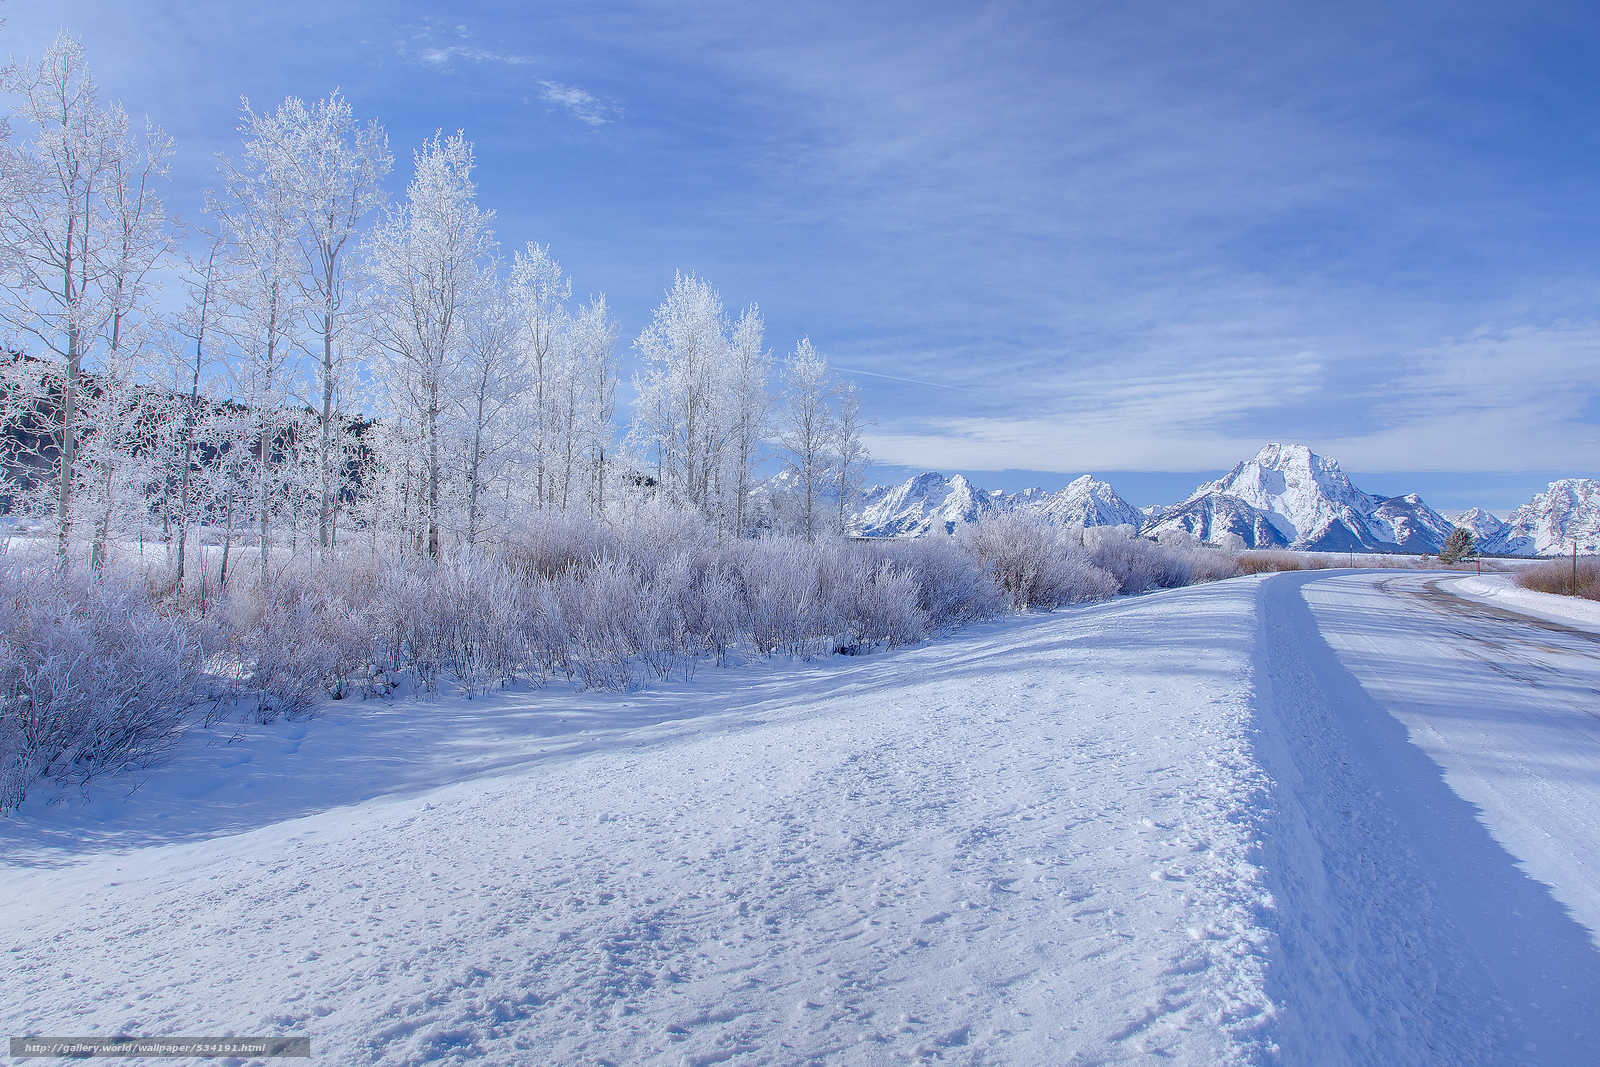 Download wallpaper pathway of light and snow grand teton national